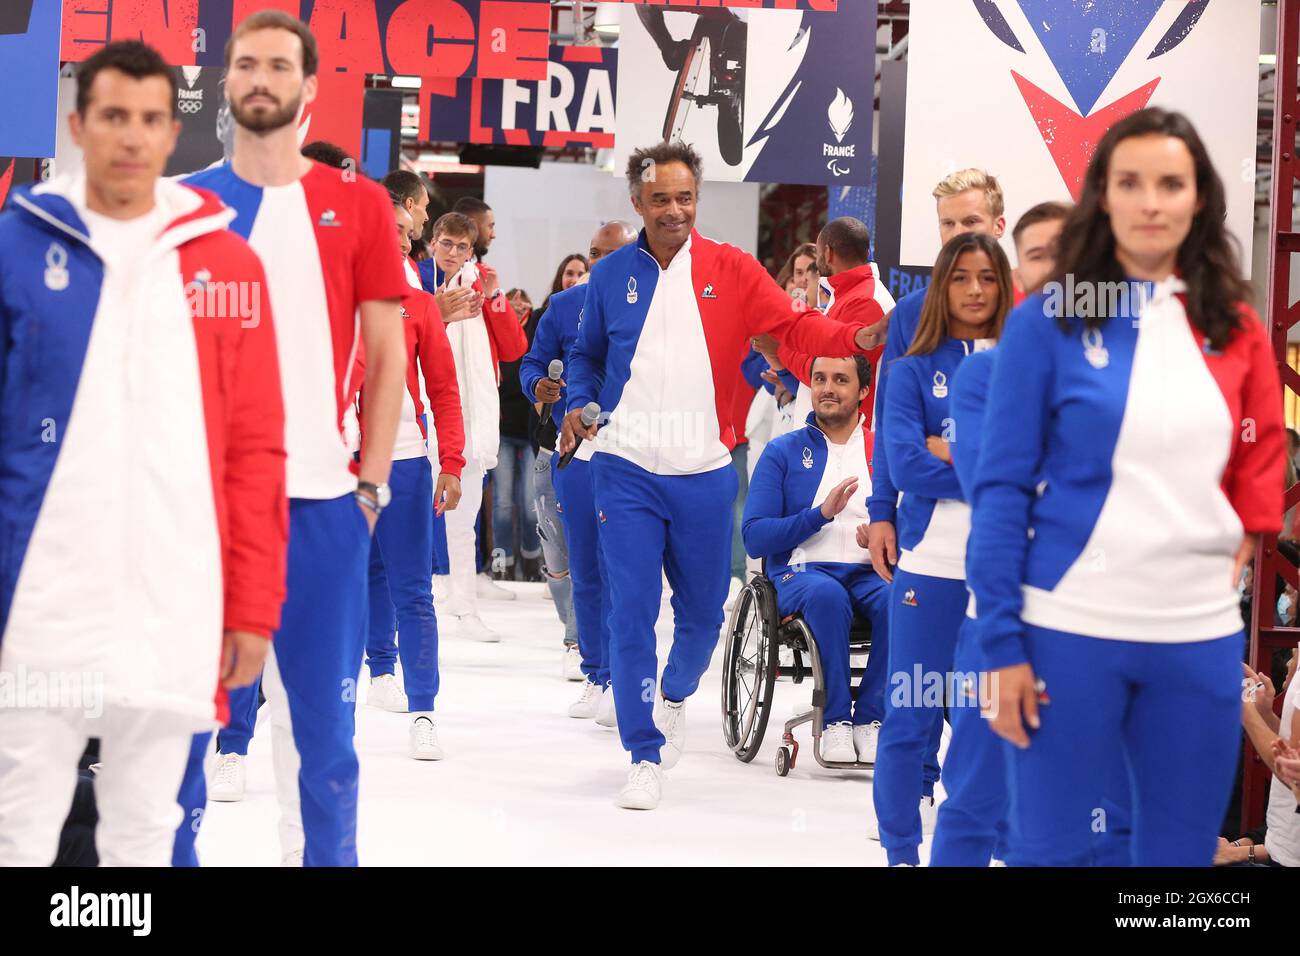 Le Coq Sportif Puts France's Olympians in a New Look: Vintage - The New  York Times